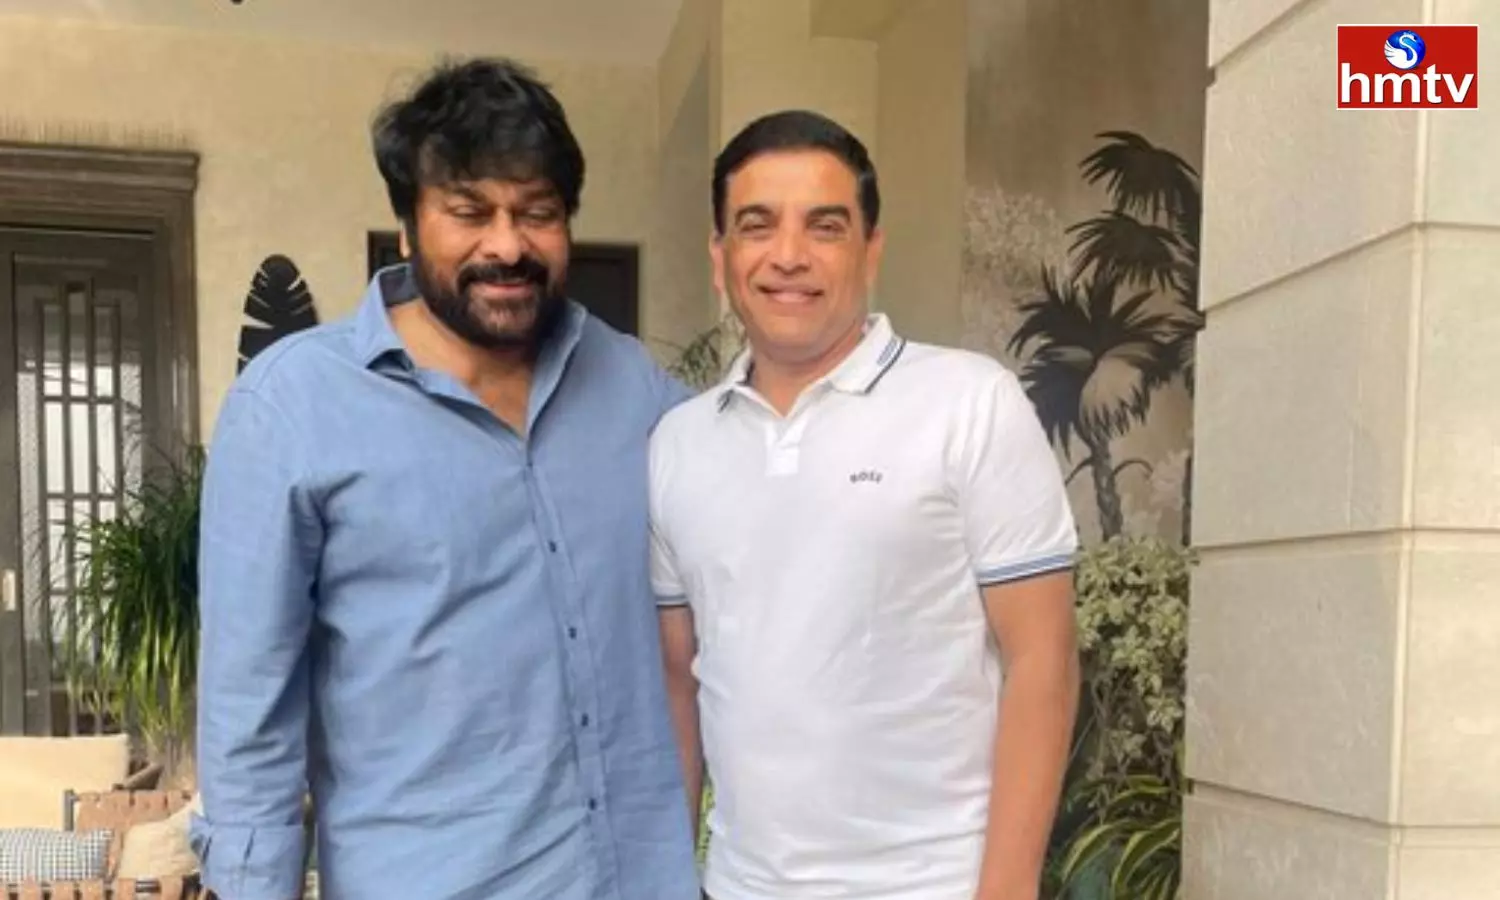 Dil Raju congratulated Chiranjeevi on being honoured with the prestigious Padma Vibhushan